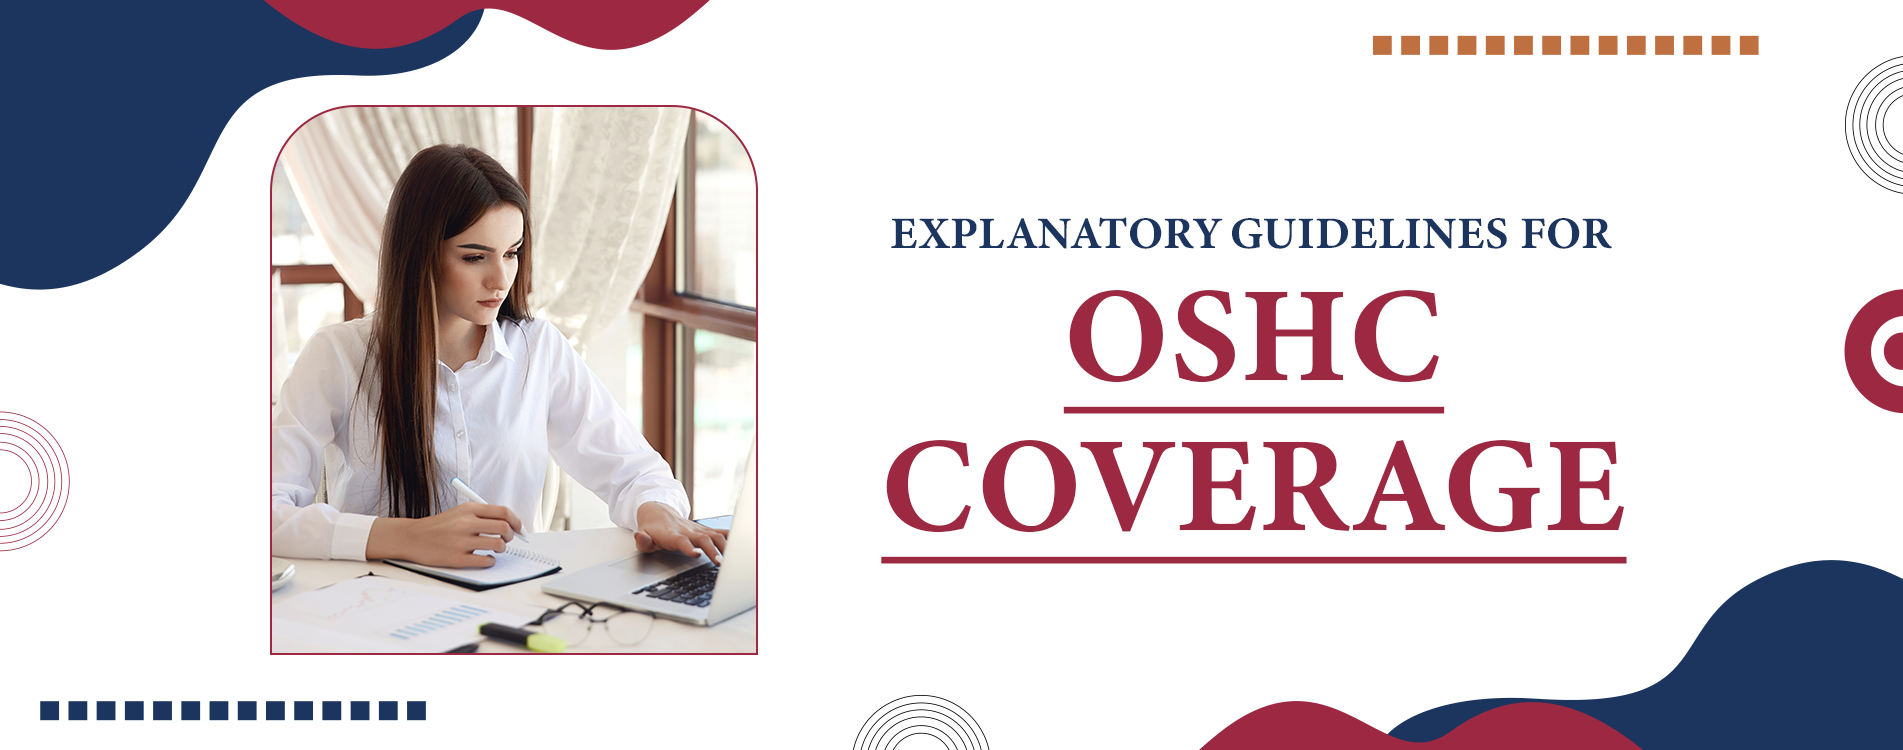 Explanatory Guidelines for OSHC Coverage